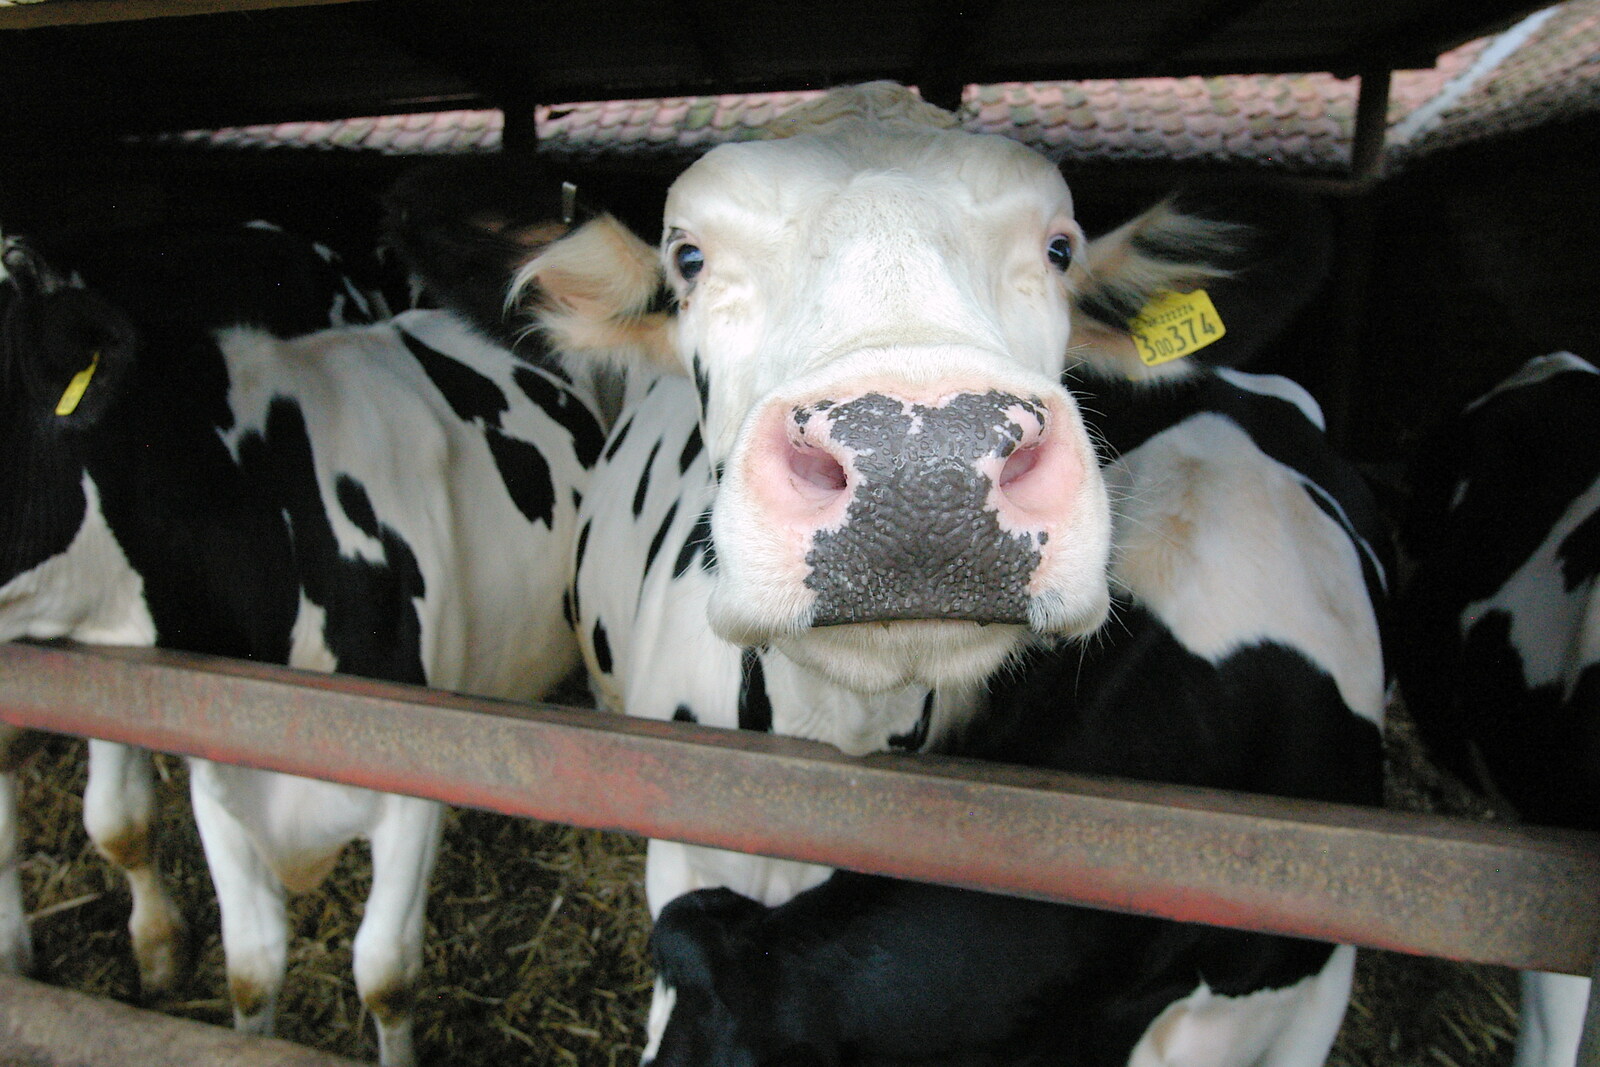 A curious cow from Life on the Neonatal Ward, Dairy Farm and Thrandeston Chapel, Suffolk - 26th August 2005